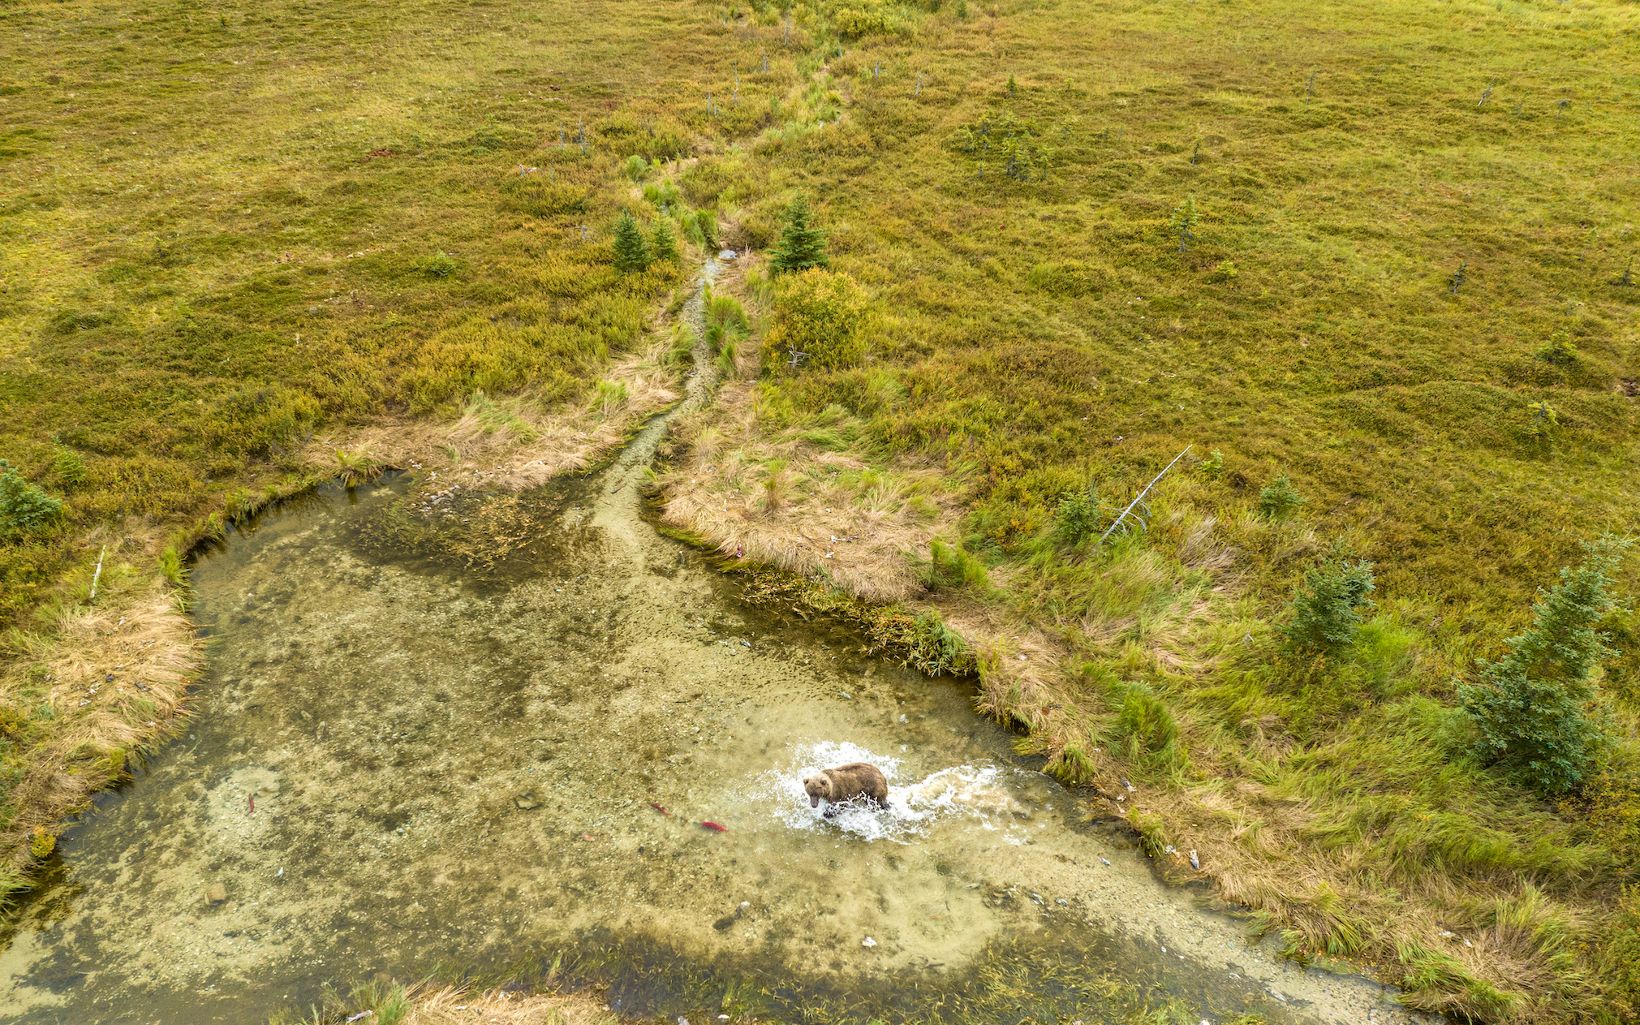 Aerial shot of a grizzly bear hunting for salmon in a stream surrounded by lush green grasses.